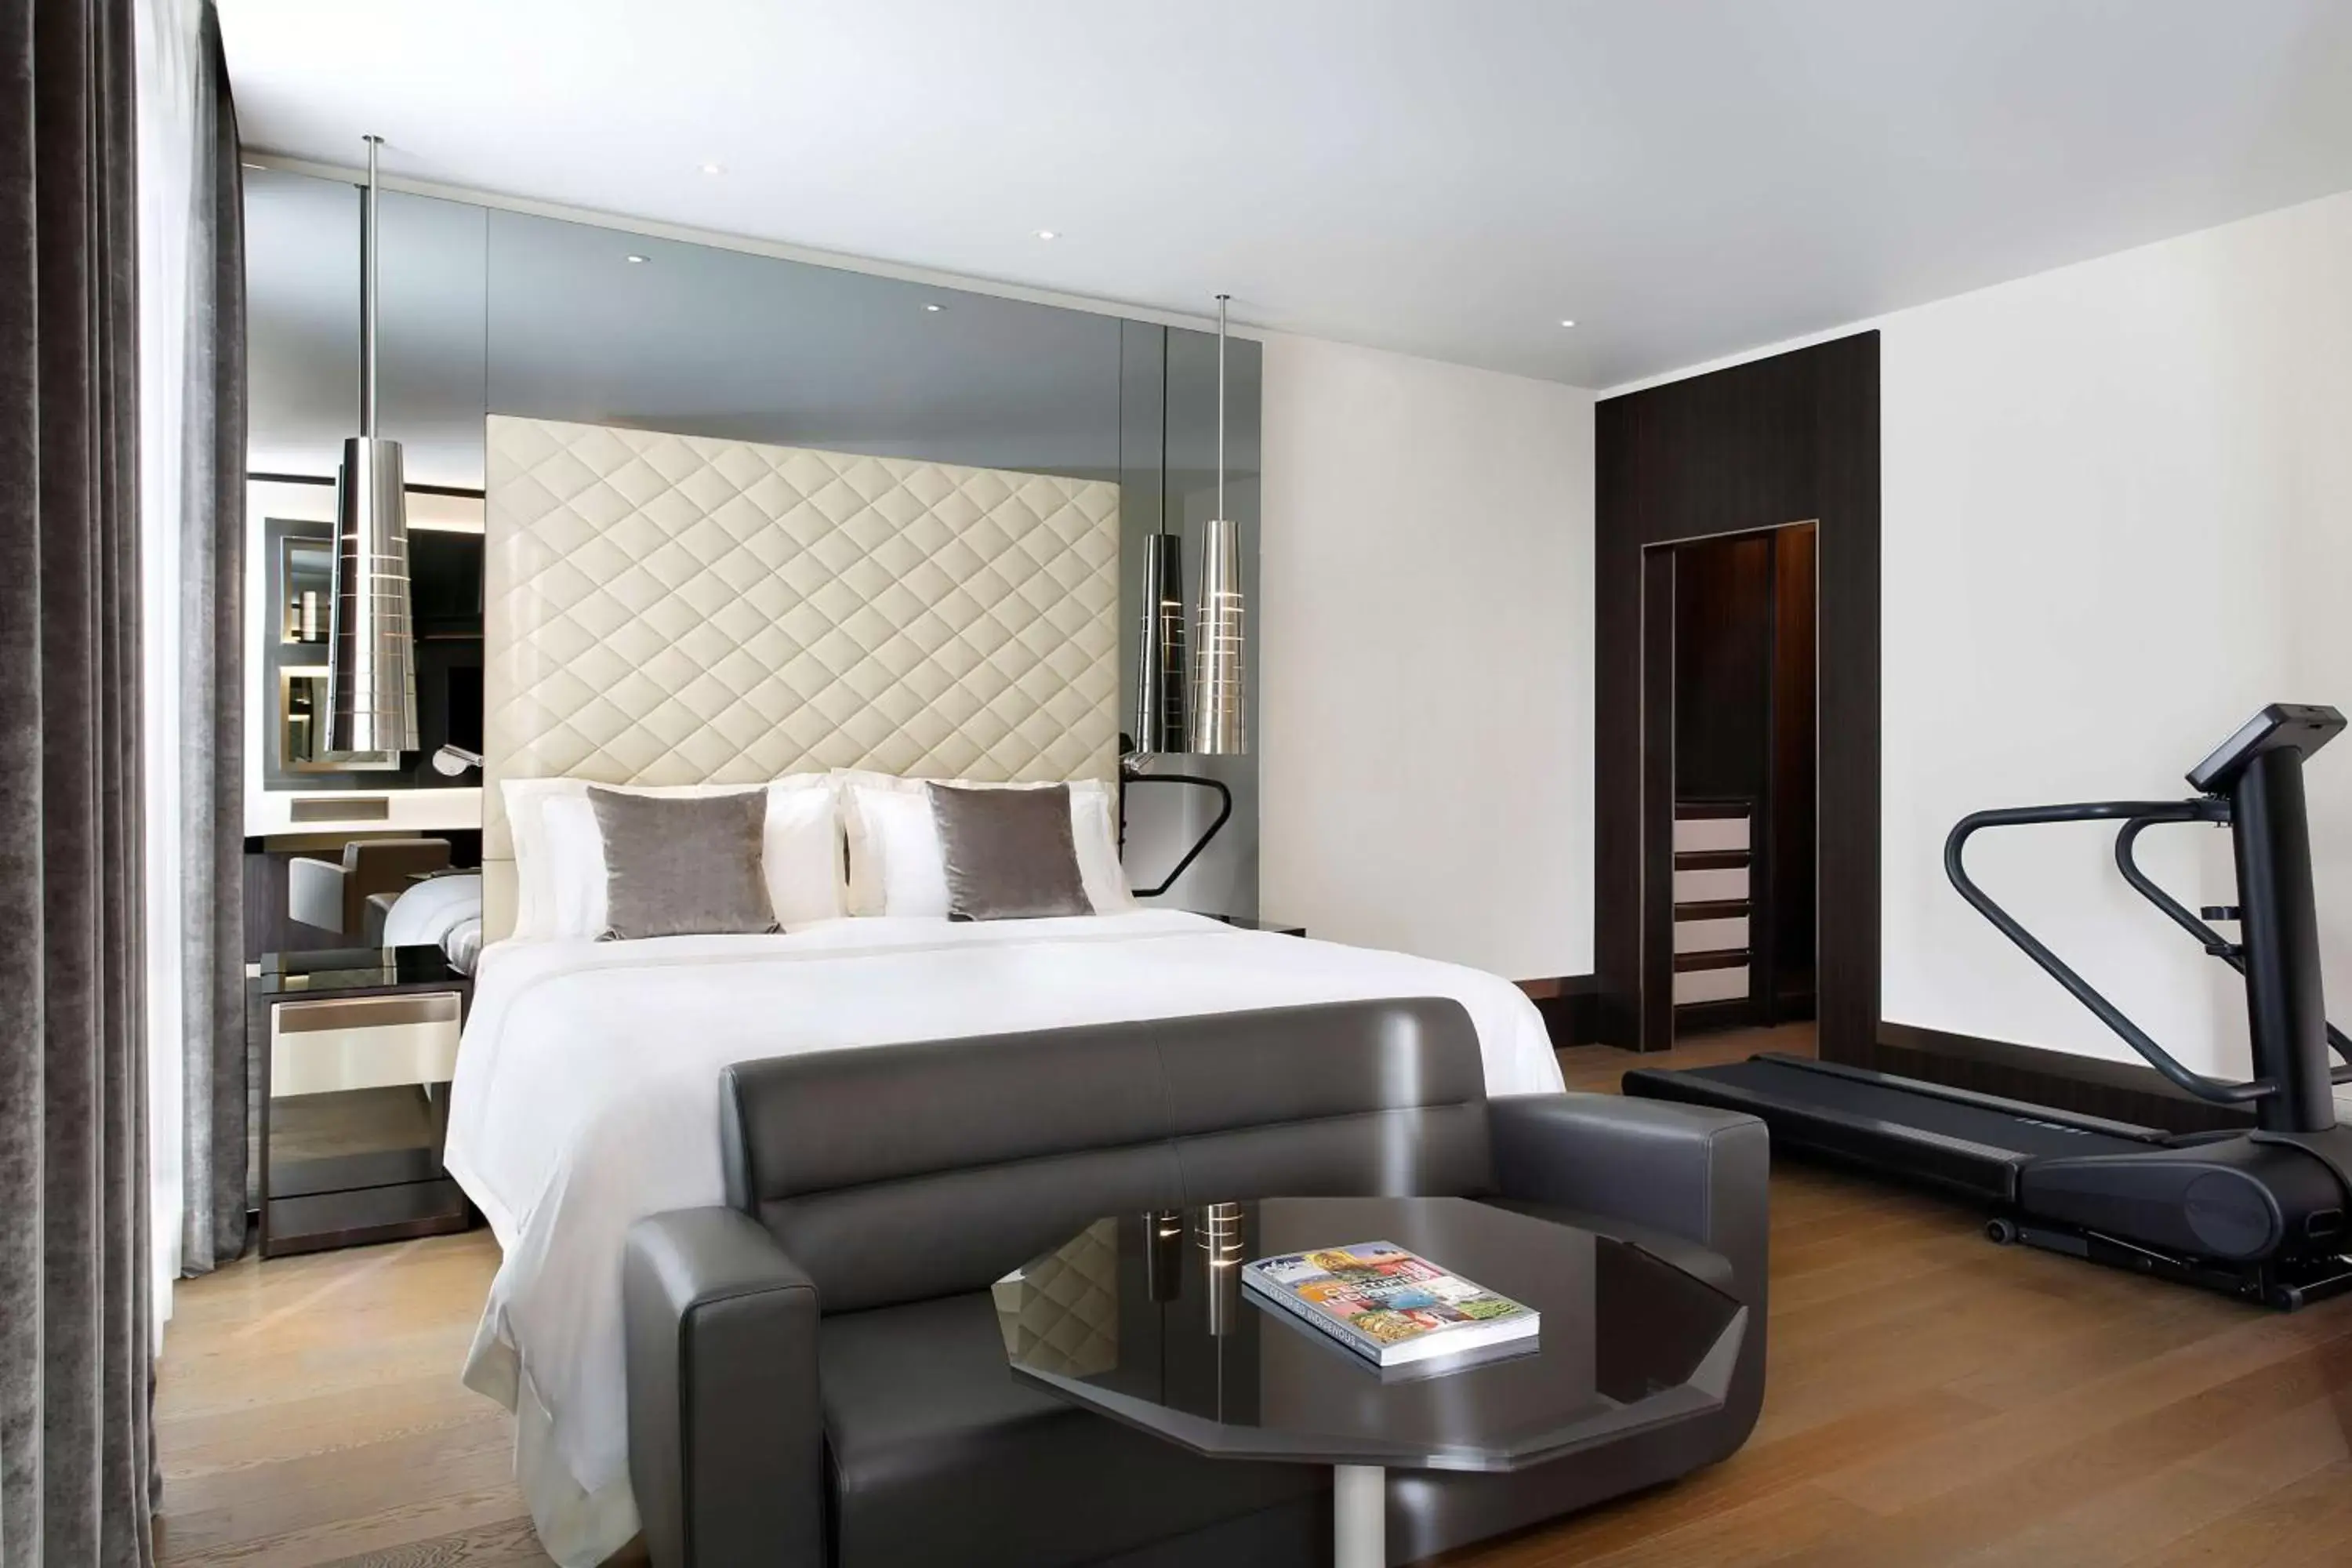 Bedroom in Excelsior Hotel Gallia, a Luxury Collection Hotel, Milan